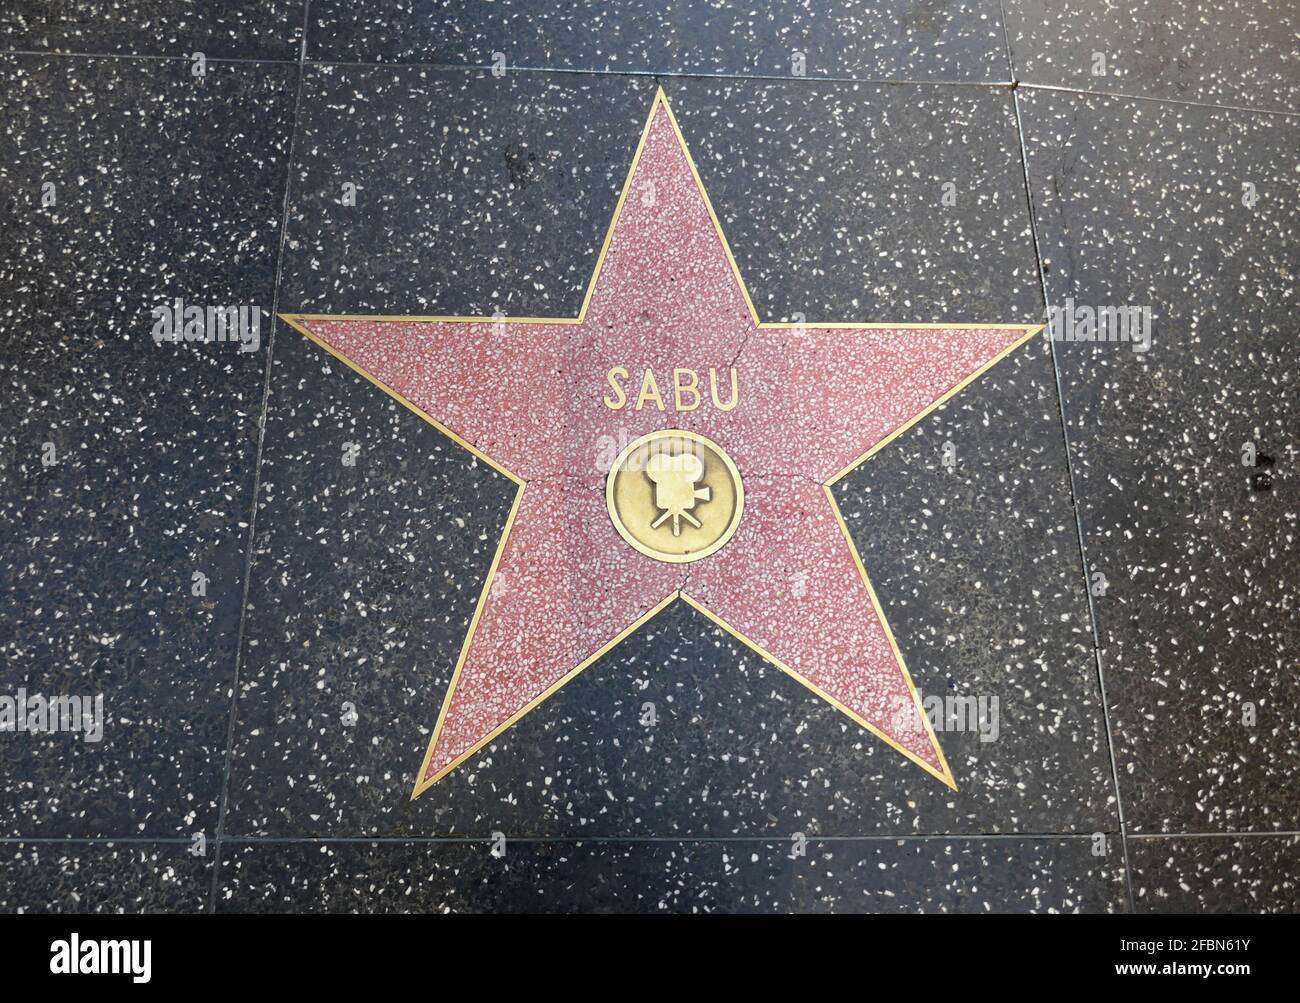 Hollywood, California, USA 17th April 2021 A general view of atmosphere of actor Sabu's Star on the Hollywood Walk of Fame on April 17, 2021 in Hollywood, California, USA. Photo by Barry King/Alamy Stock Photo Stock Photo